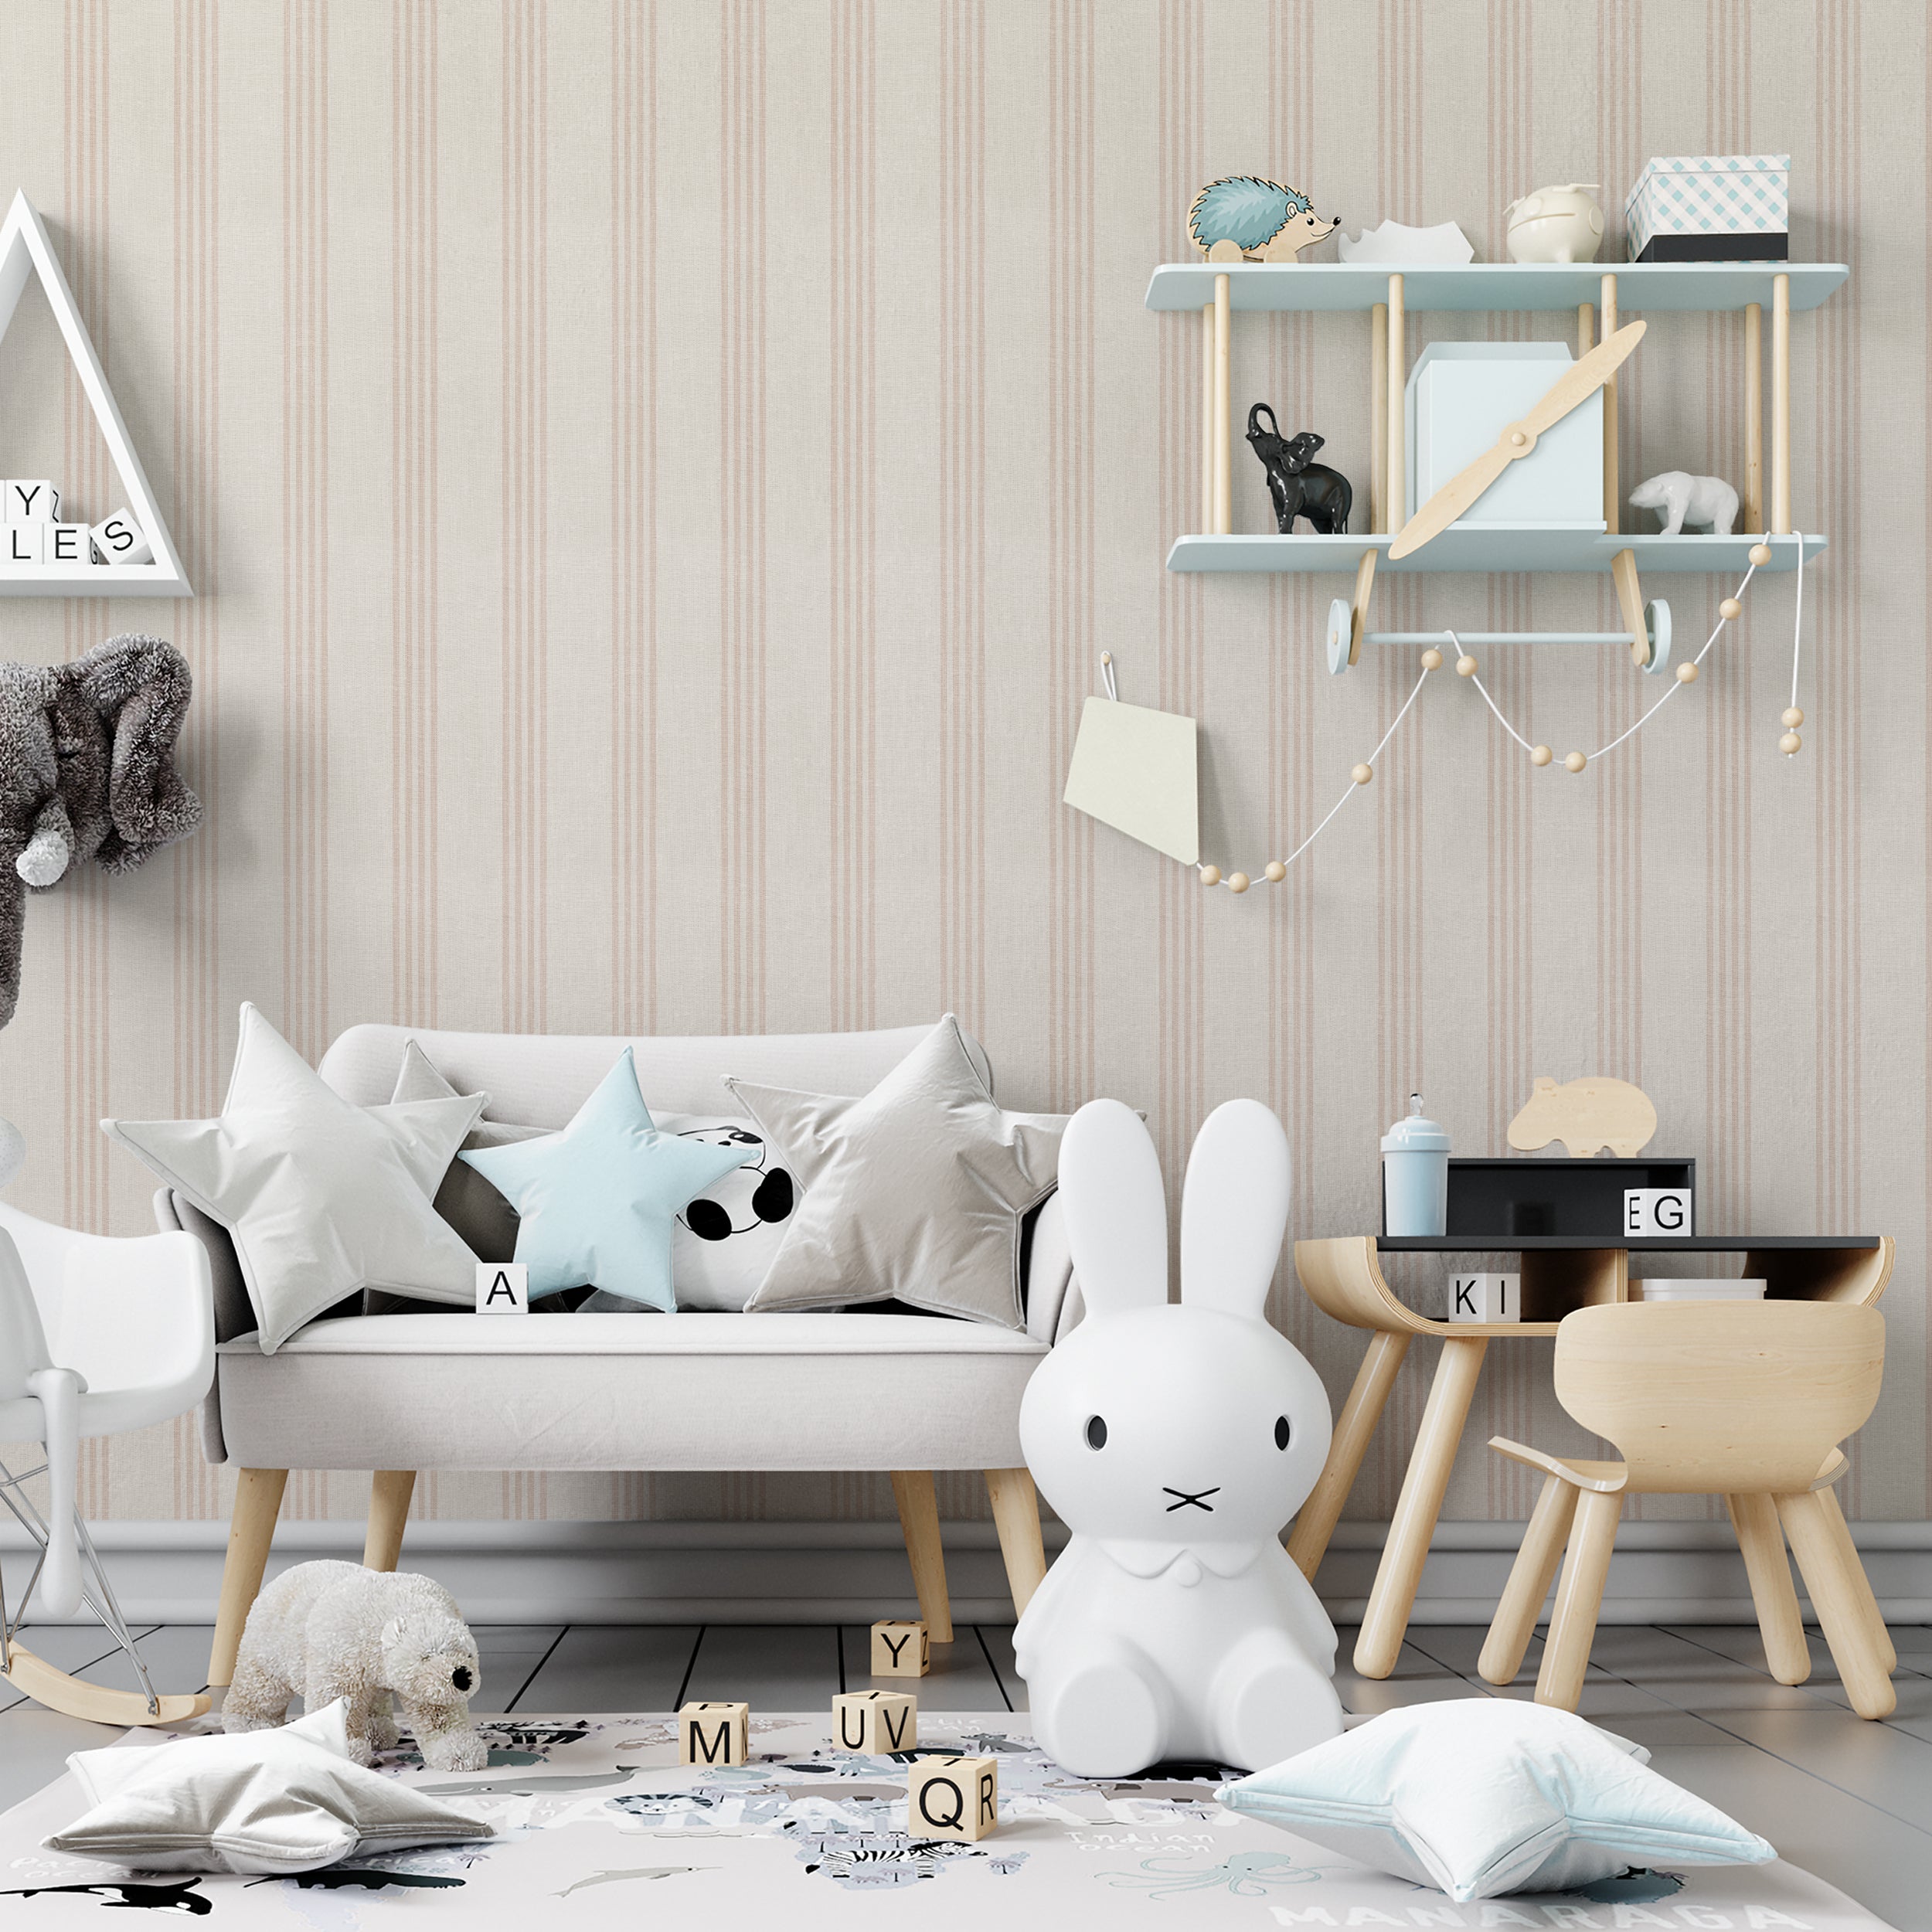 A playful and whimsical children's room with a beige-striped "Ticking Fabrics 8" wallpaper providing a warm backdrop. The room features a variety of child-friendly decorations, including a plush bunny chair, a sofa adorned with star-shaped pillows, and wooden toys scattered on the floor, creating an inviting and imaginative play space.